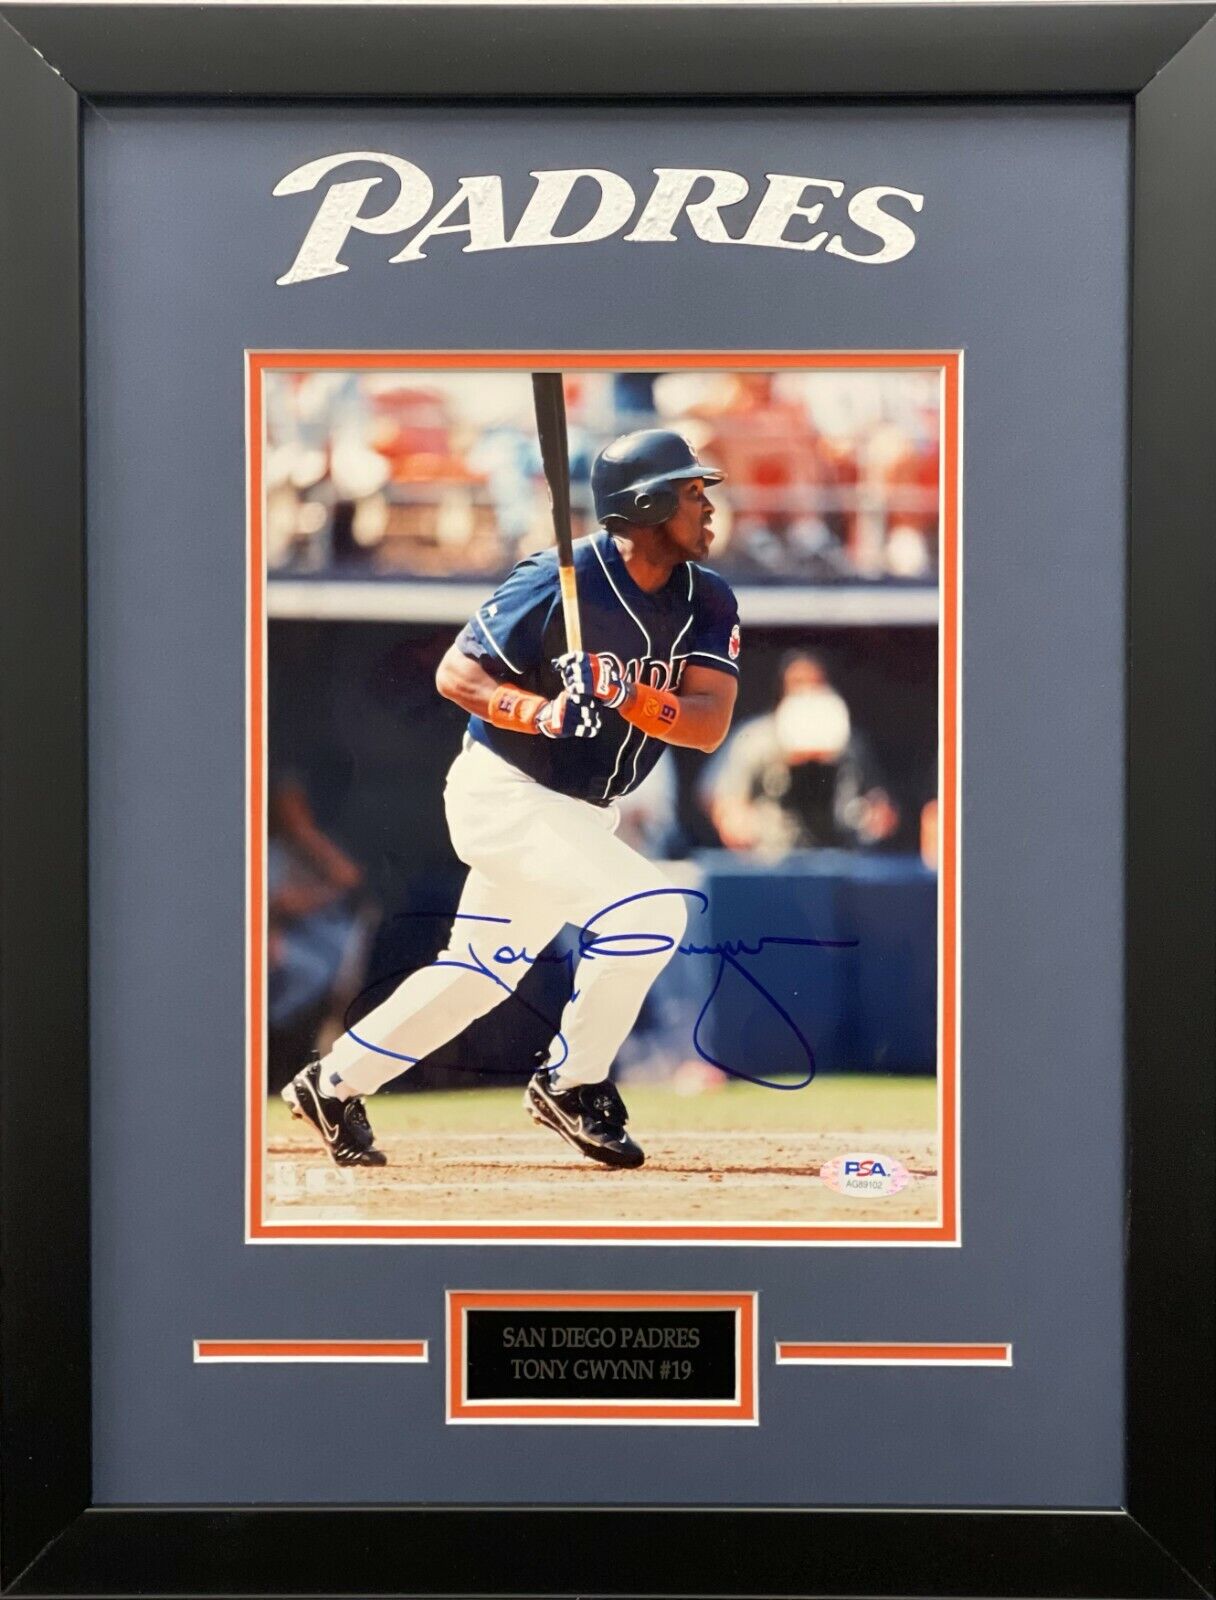 Tony Gwynn autographed signed framed 8x10 Photo Poster painting MLB San Diego Padres PSA COA